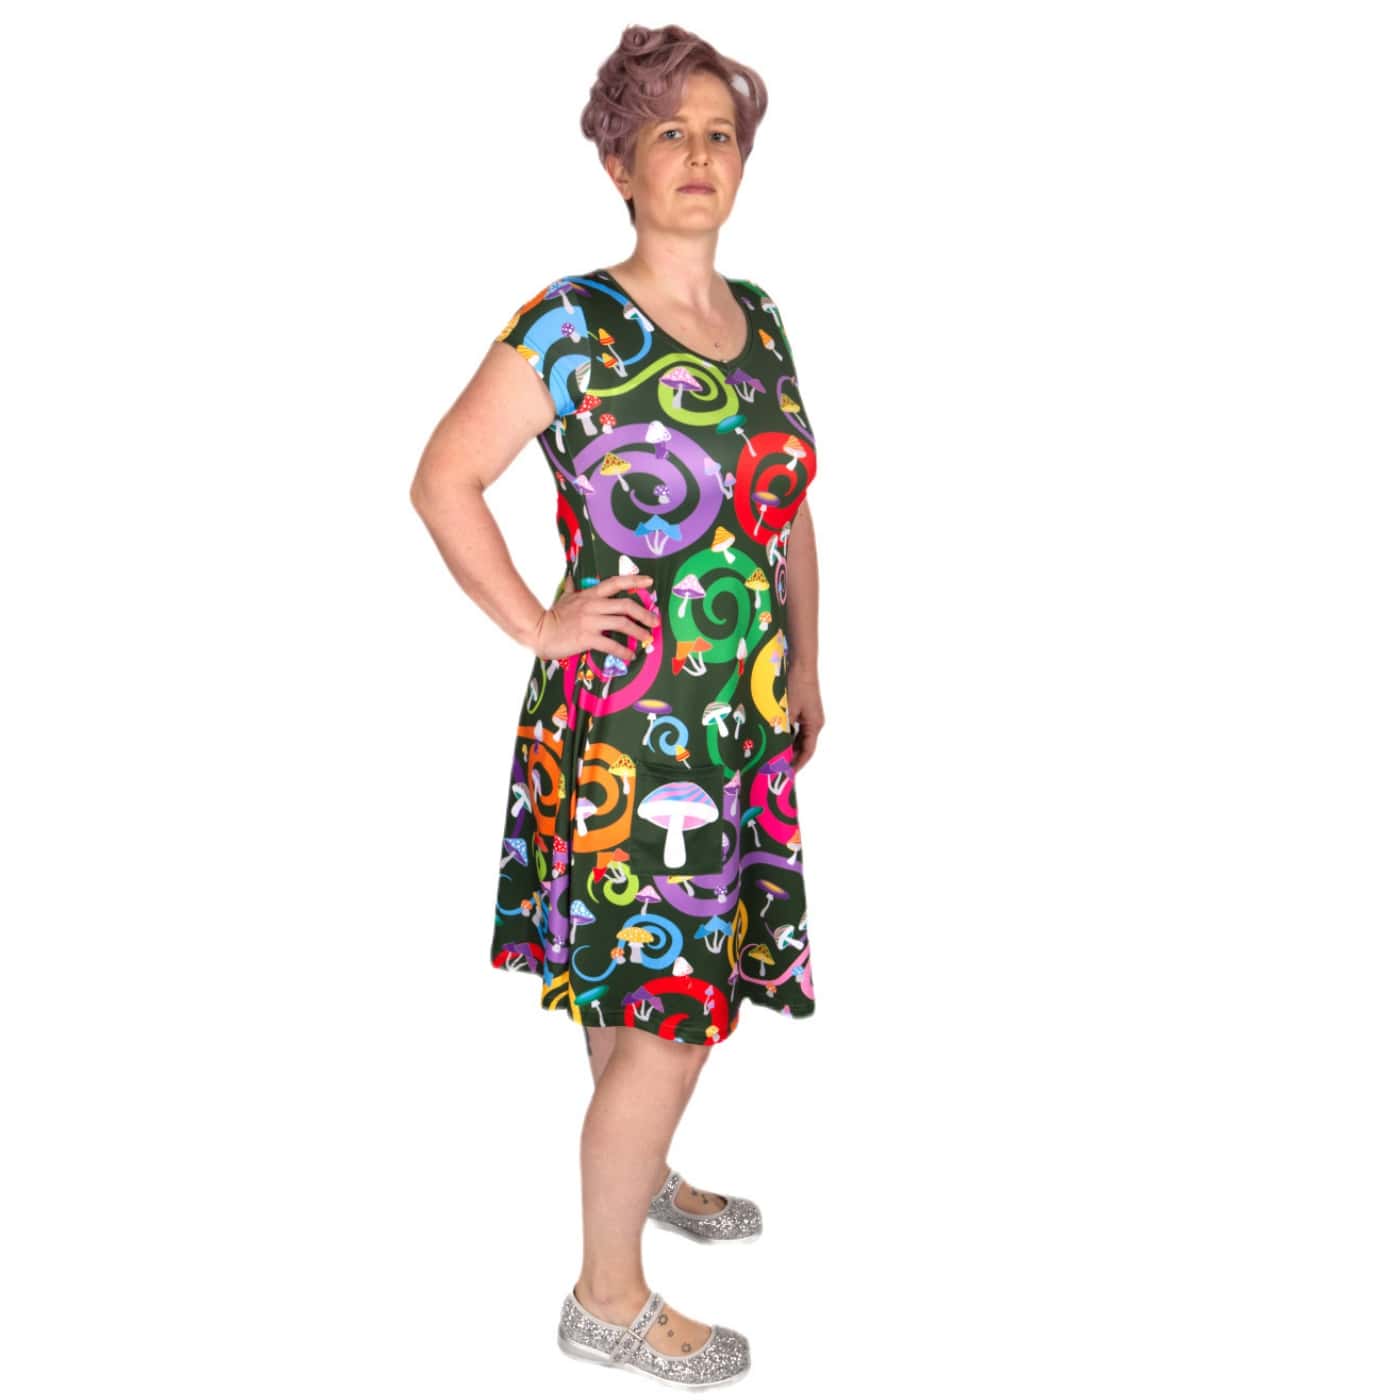 Toadstool Tunic Dress by RainbowsAndFairies.com.au (Mushroom - Psychedelic Swirls - Woodstock - Vintage Inspired - Kitsch - Dress With Pockets - Mod) - SKU: CL_TUNDR_TOADS_ORG - Pic-07